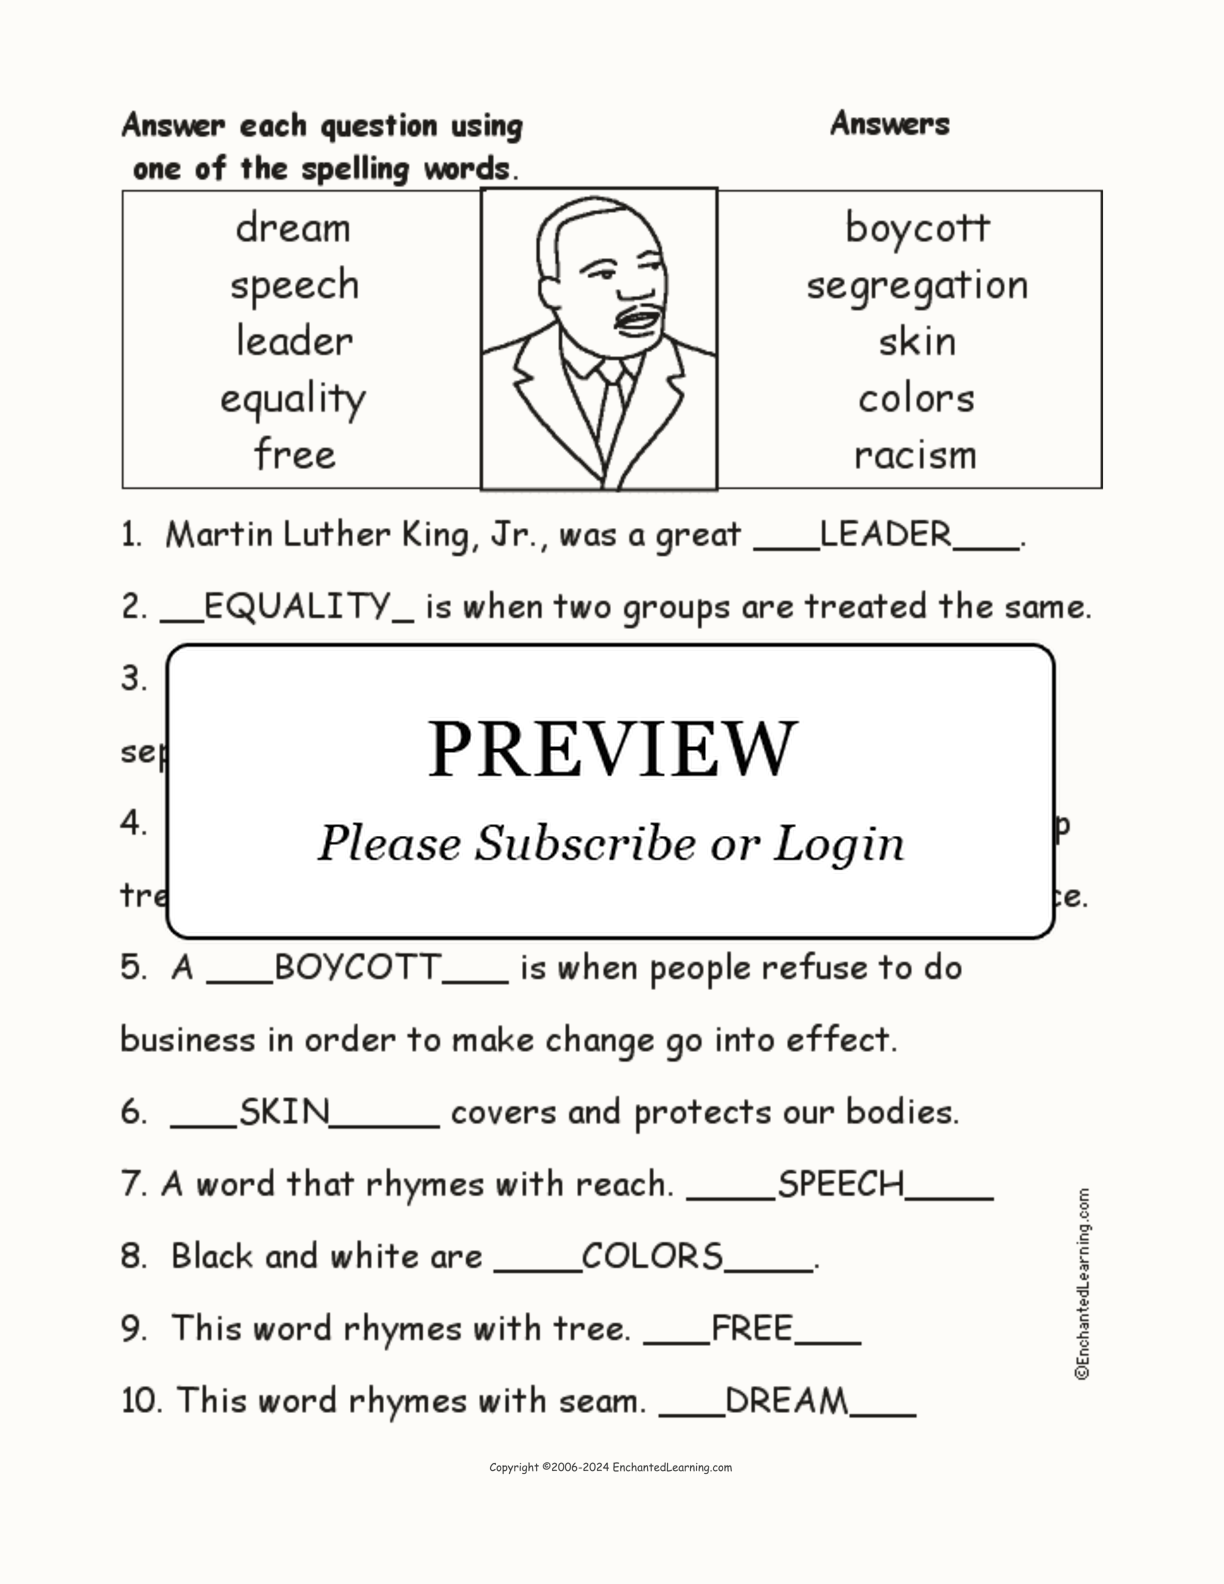 Martin Luther King, Jr., Spelling Word Questions interactive worksheet page 2